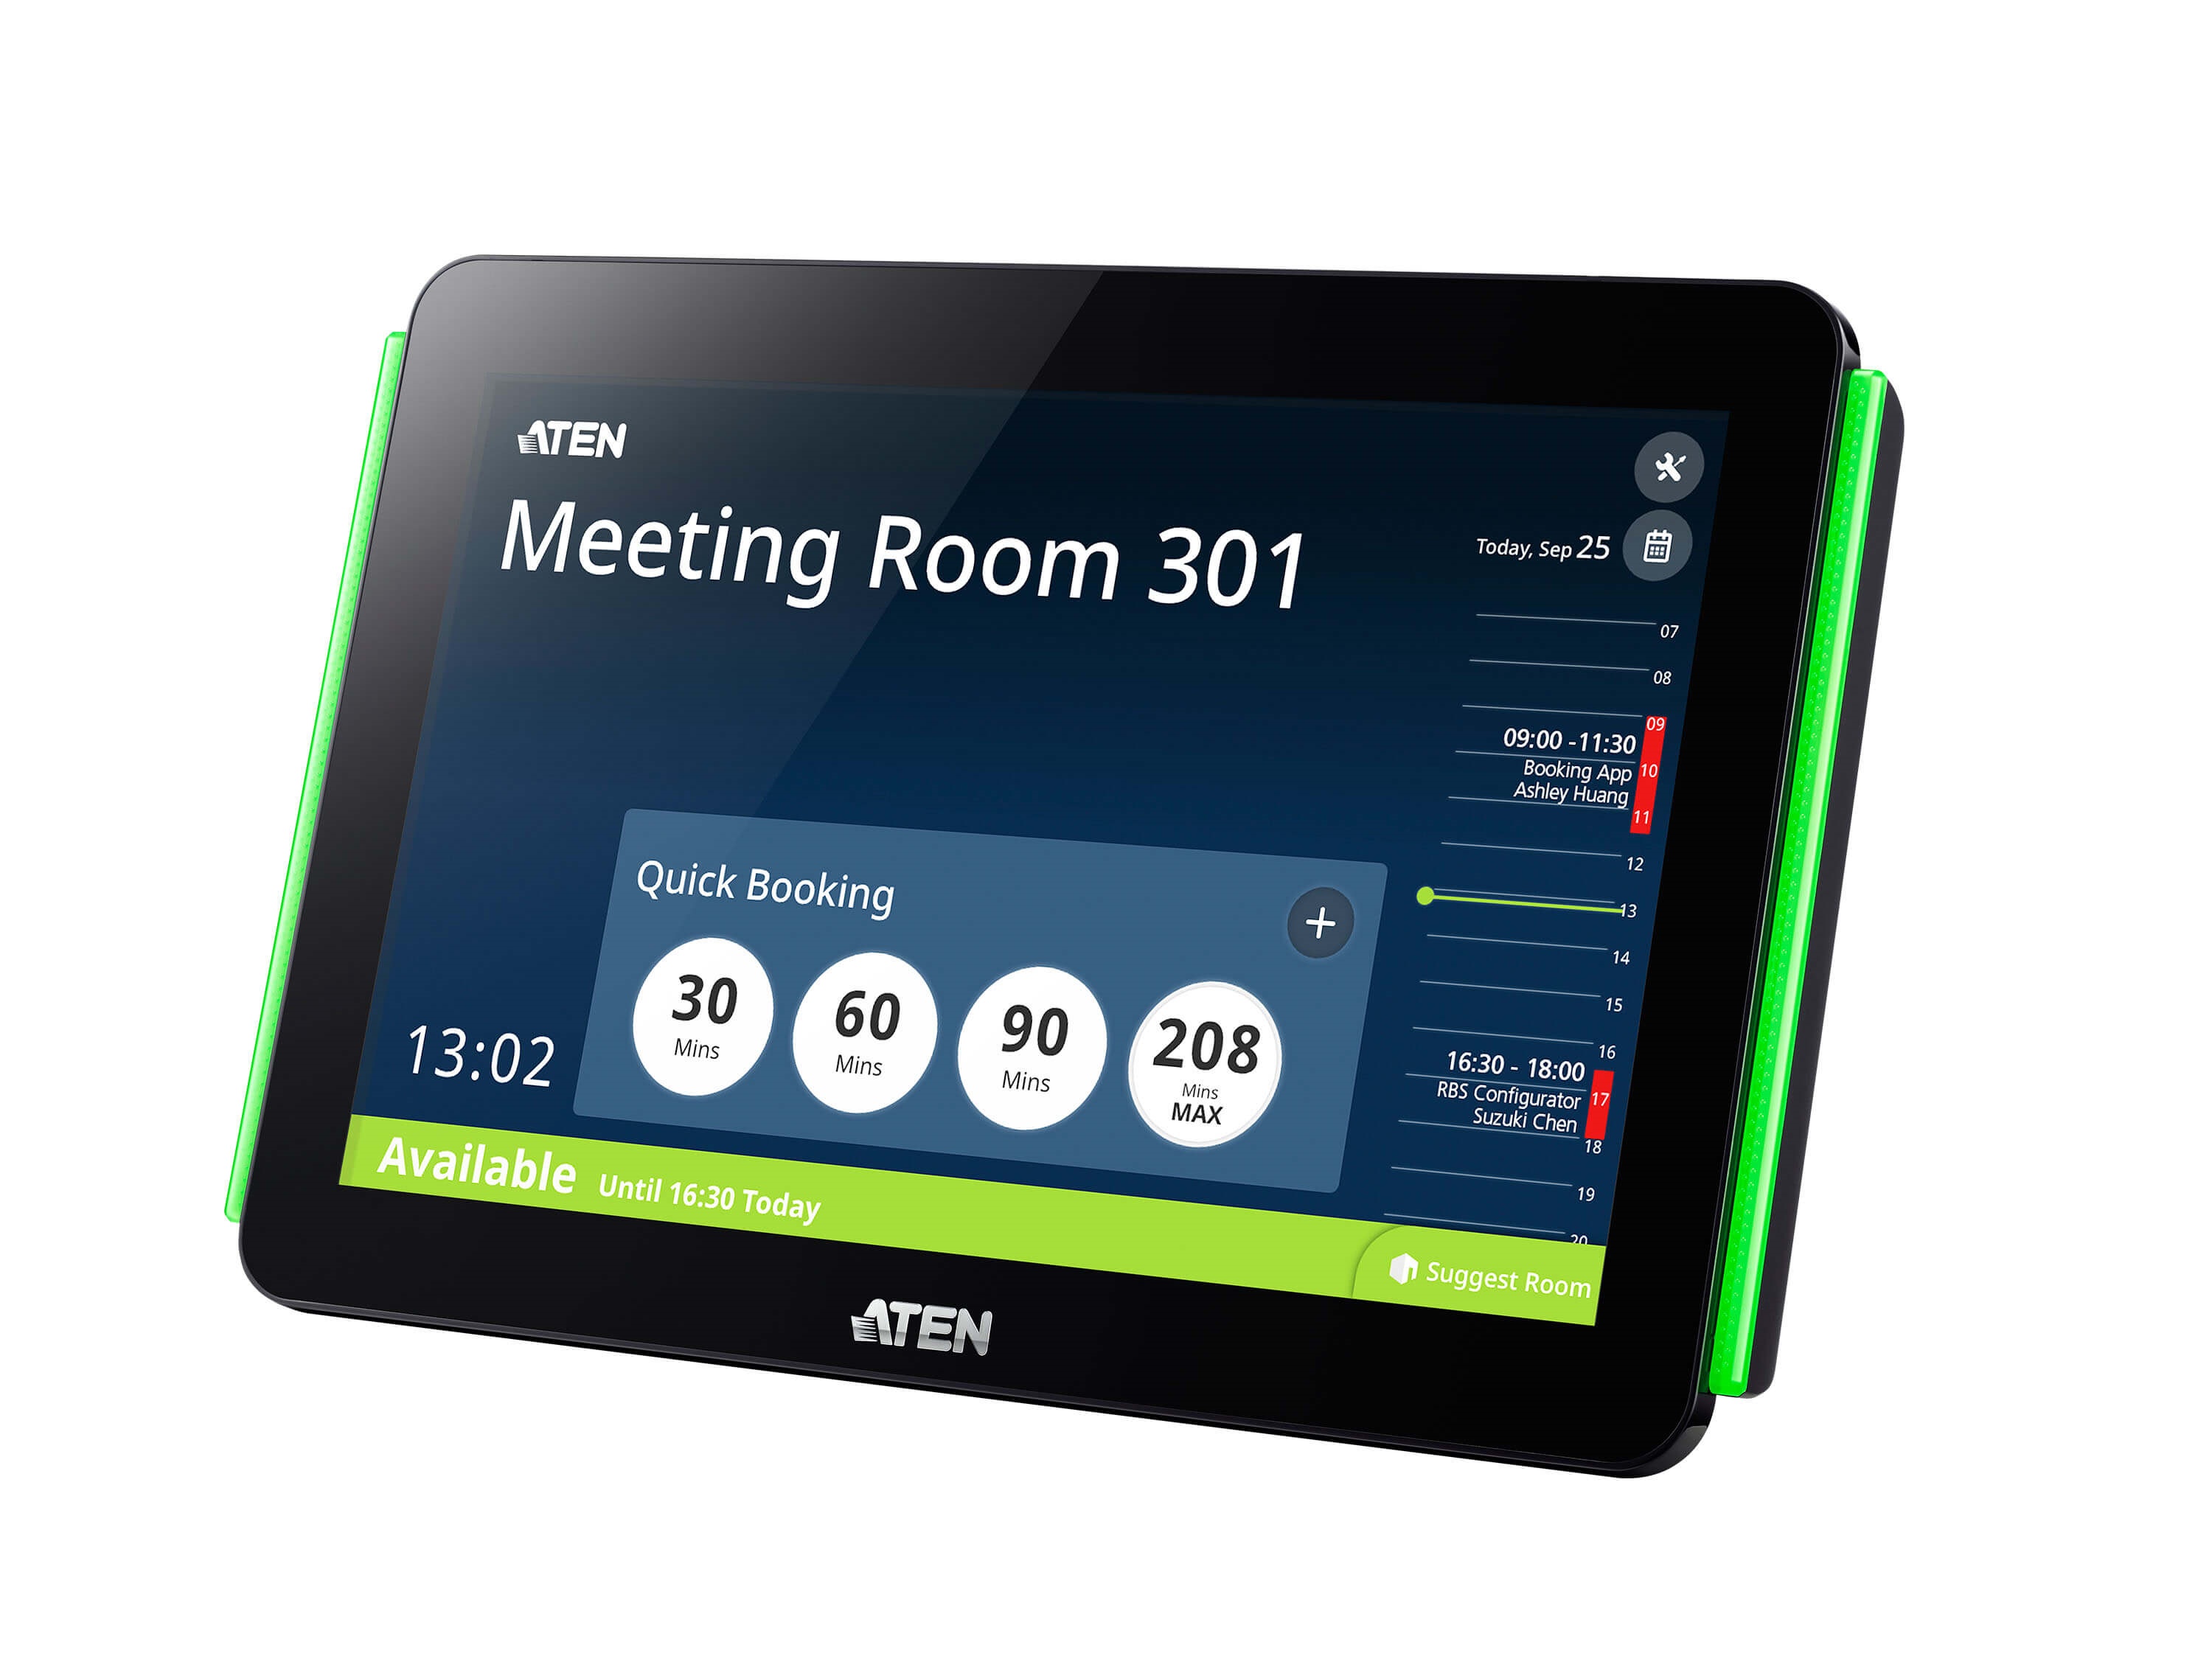 VK430 10.1 inch RBS Panel Room Booking System by Aten